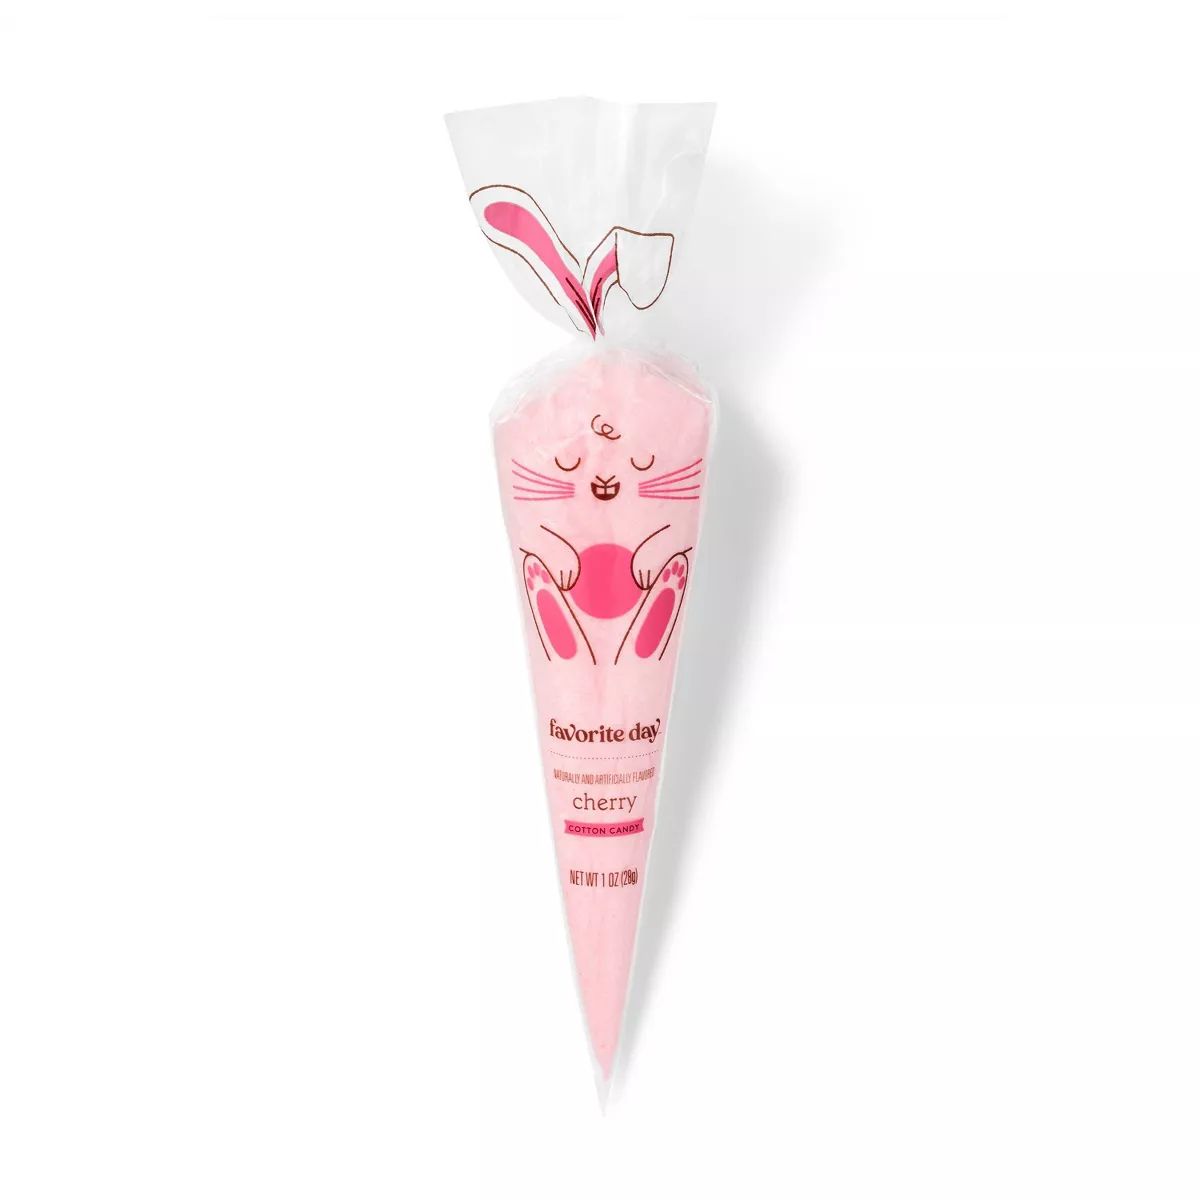 Spring Bunny Cotton Candy Cone Pink - 1oz - Favorite Day™ | Target